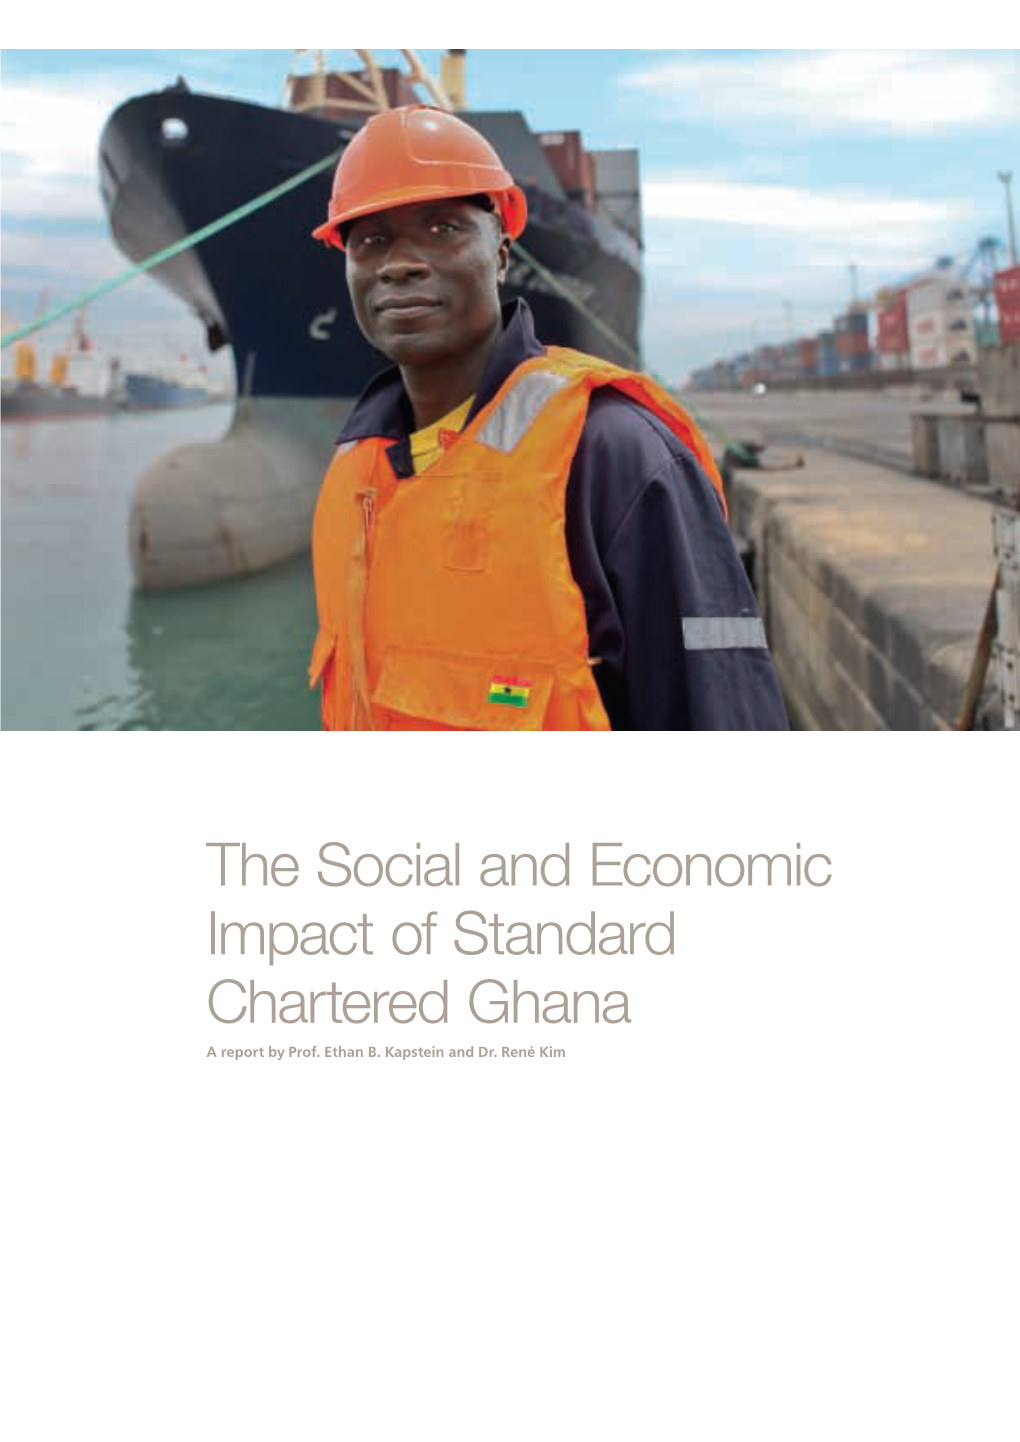 The Social and Economic Impact of Standard Chartered Ghana a Report by Prof